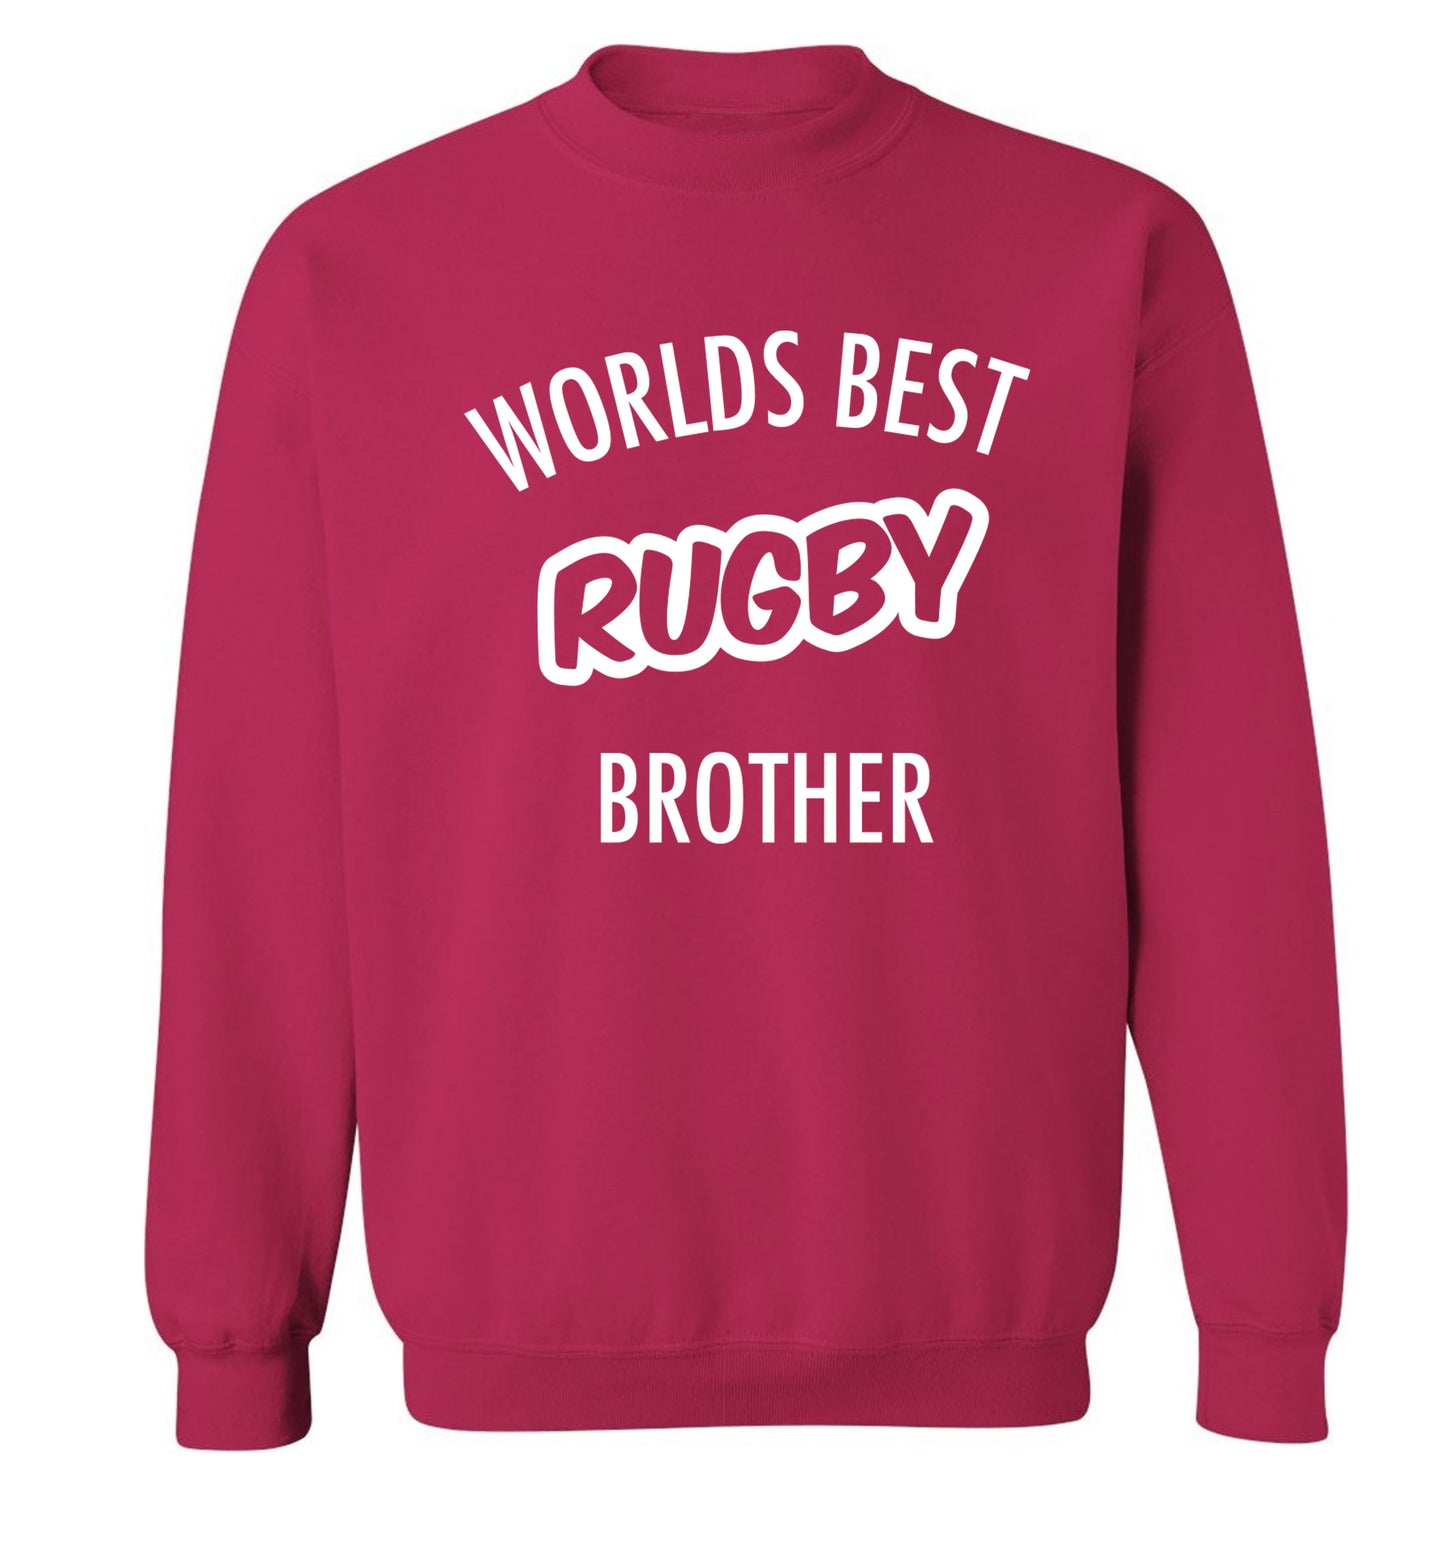 Worlds best rugby brother Adult's unisex pink Sweater 2XL